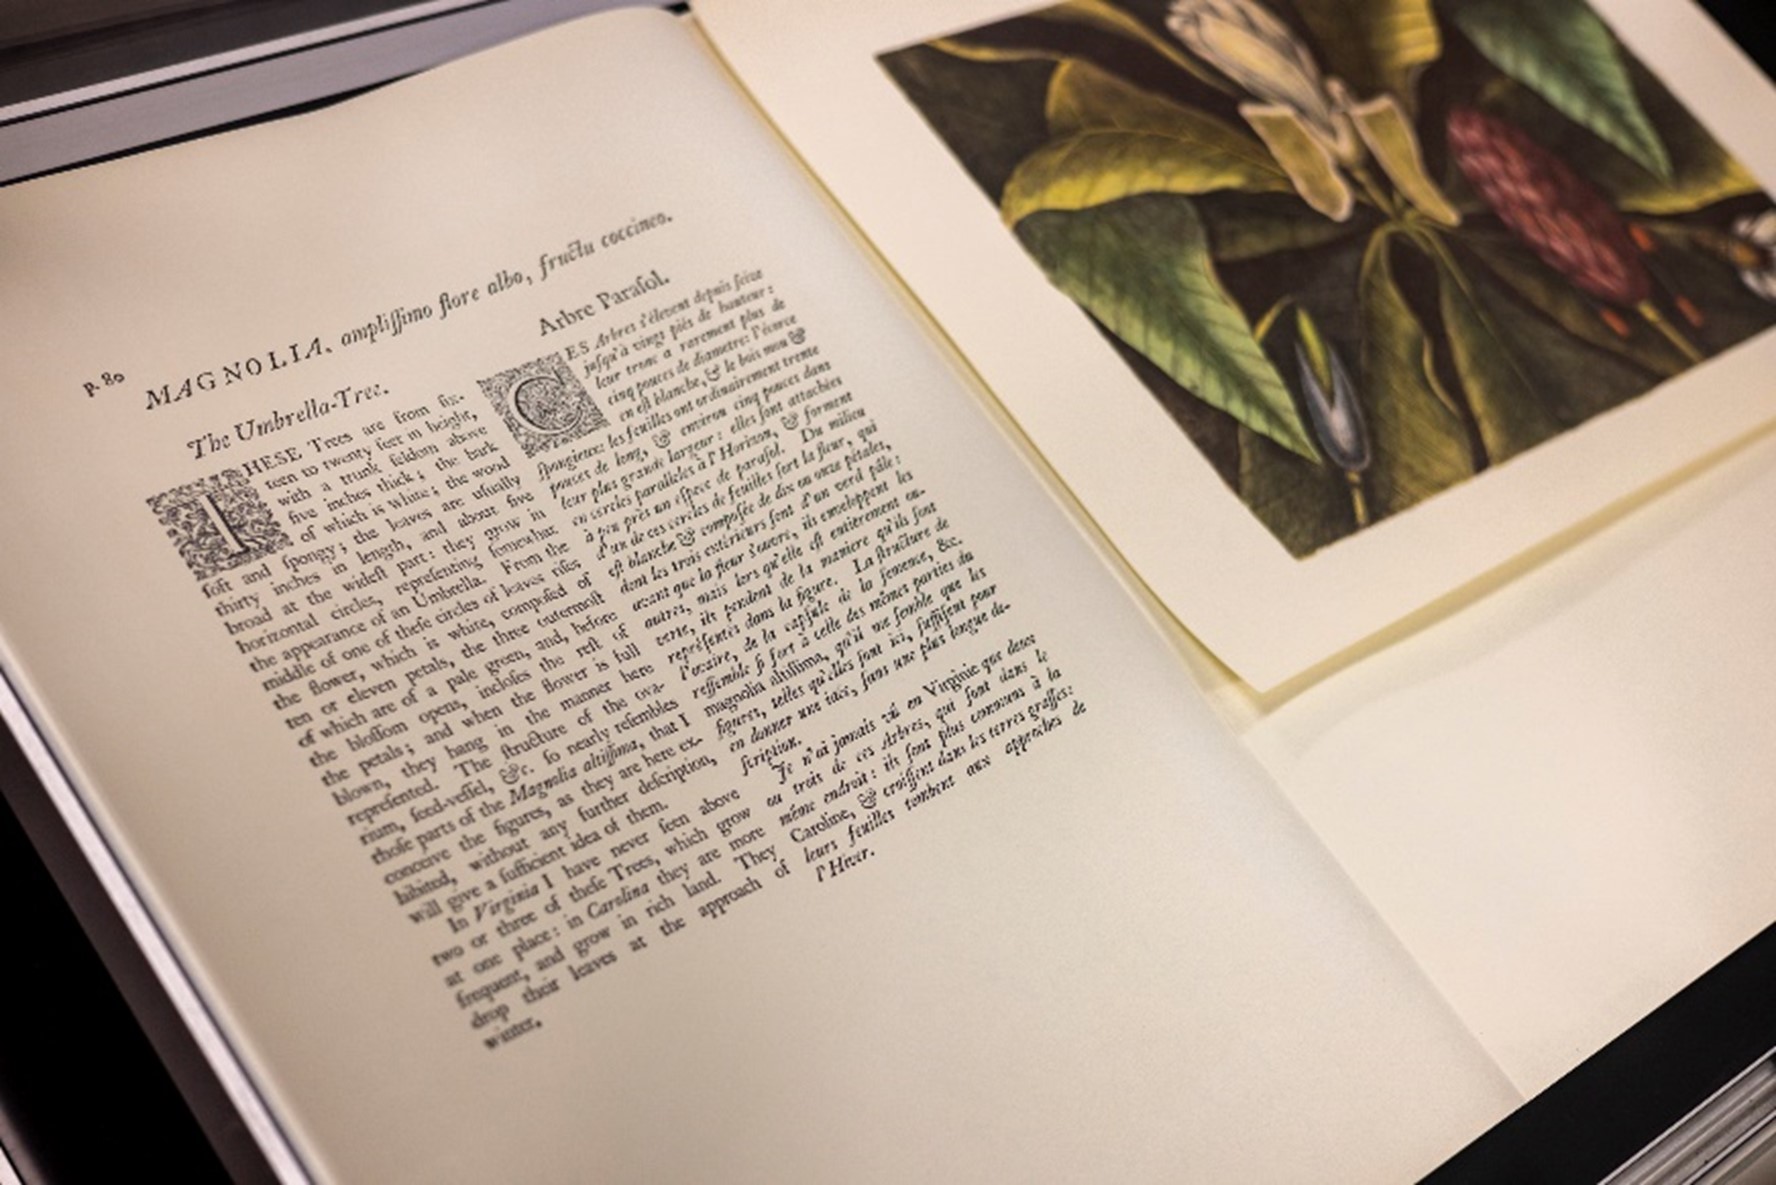 Photograph of a book from the Archives with illustrations of plants